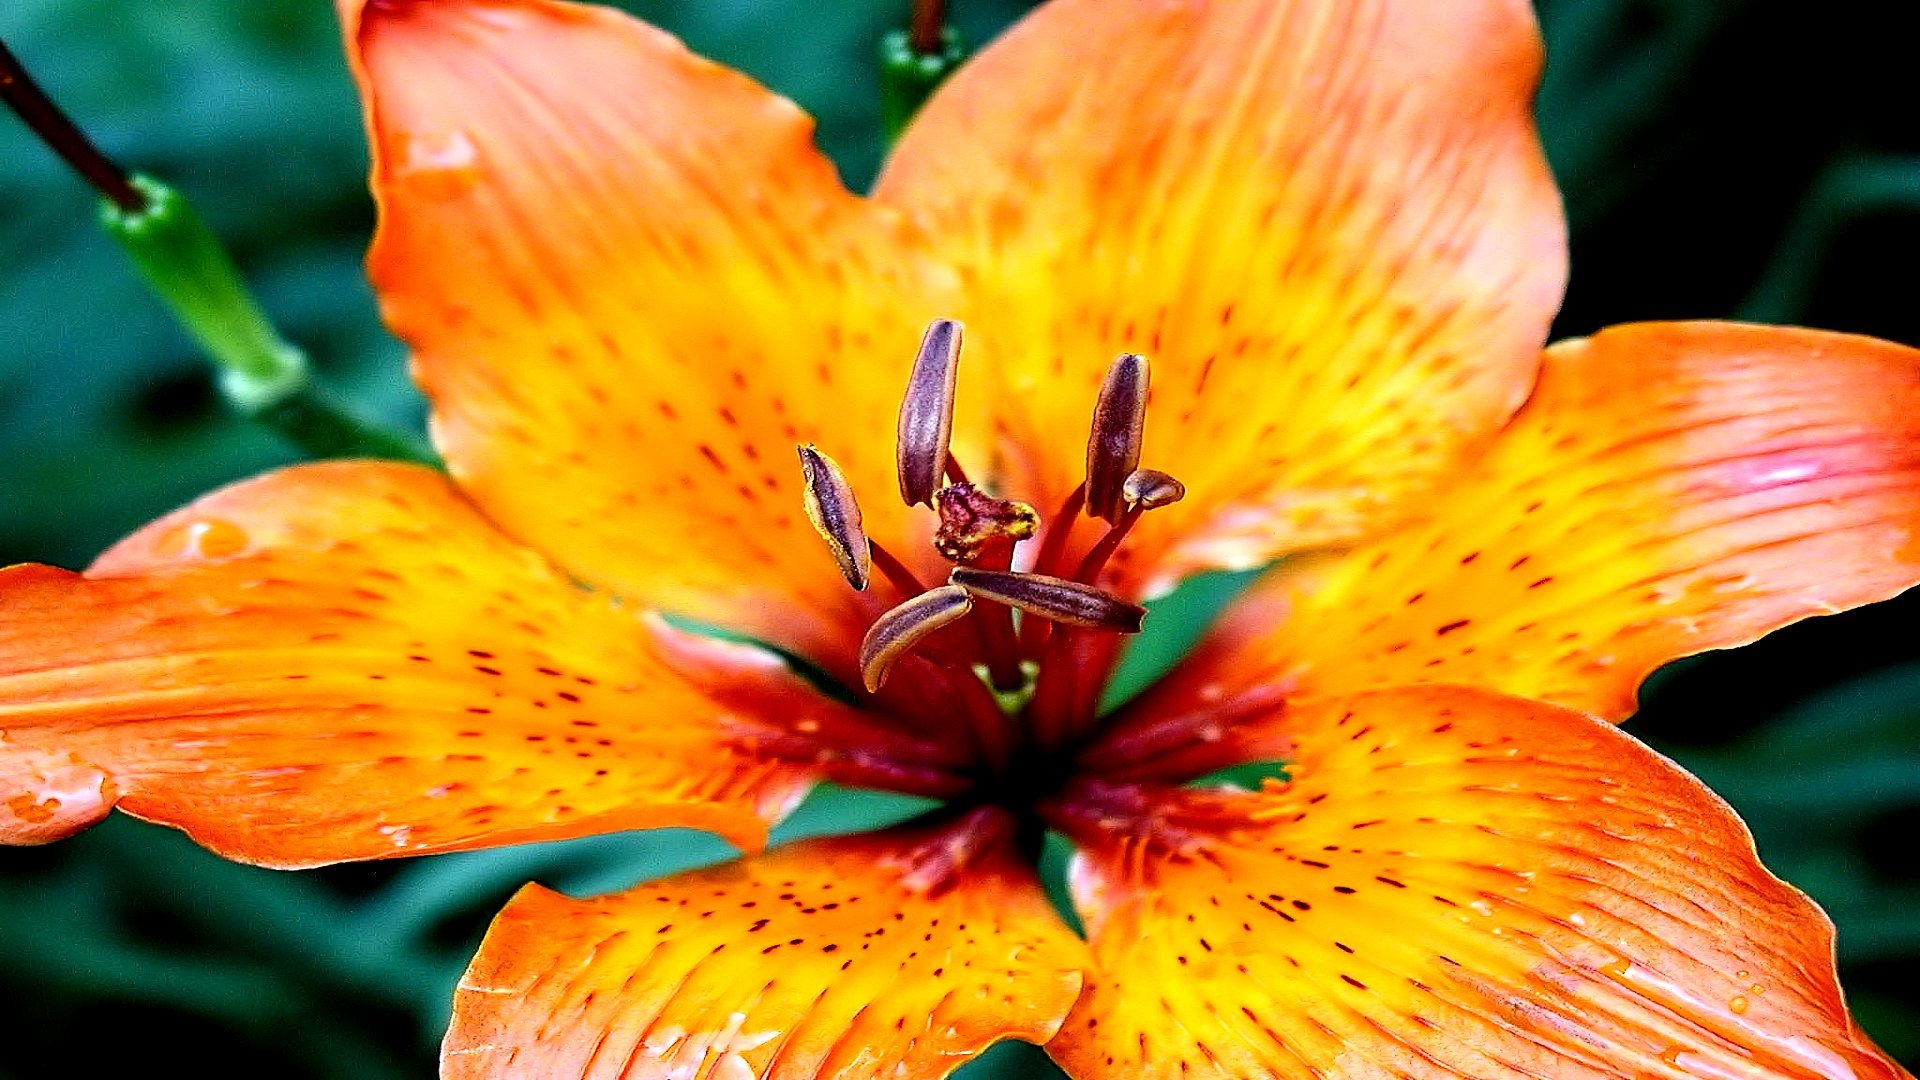 Download 1080p Lily PC background ID:132042 for free